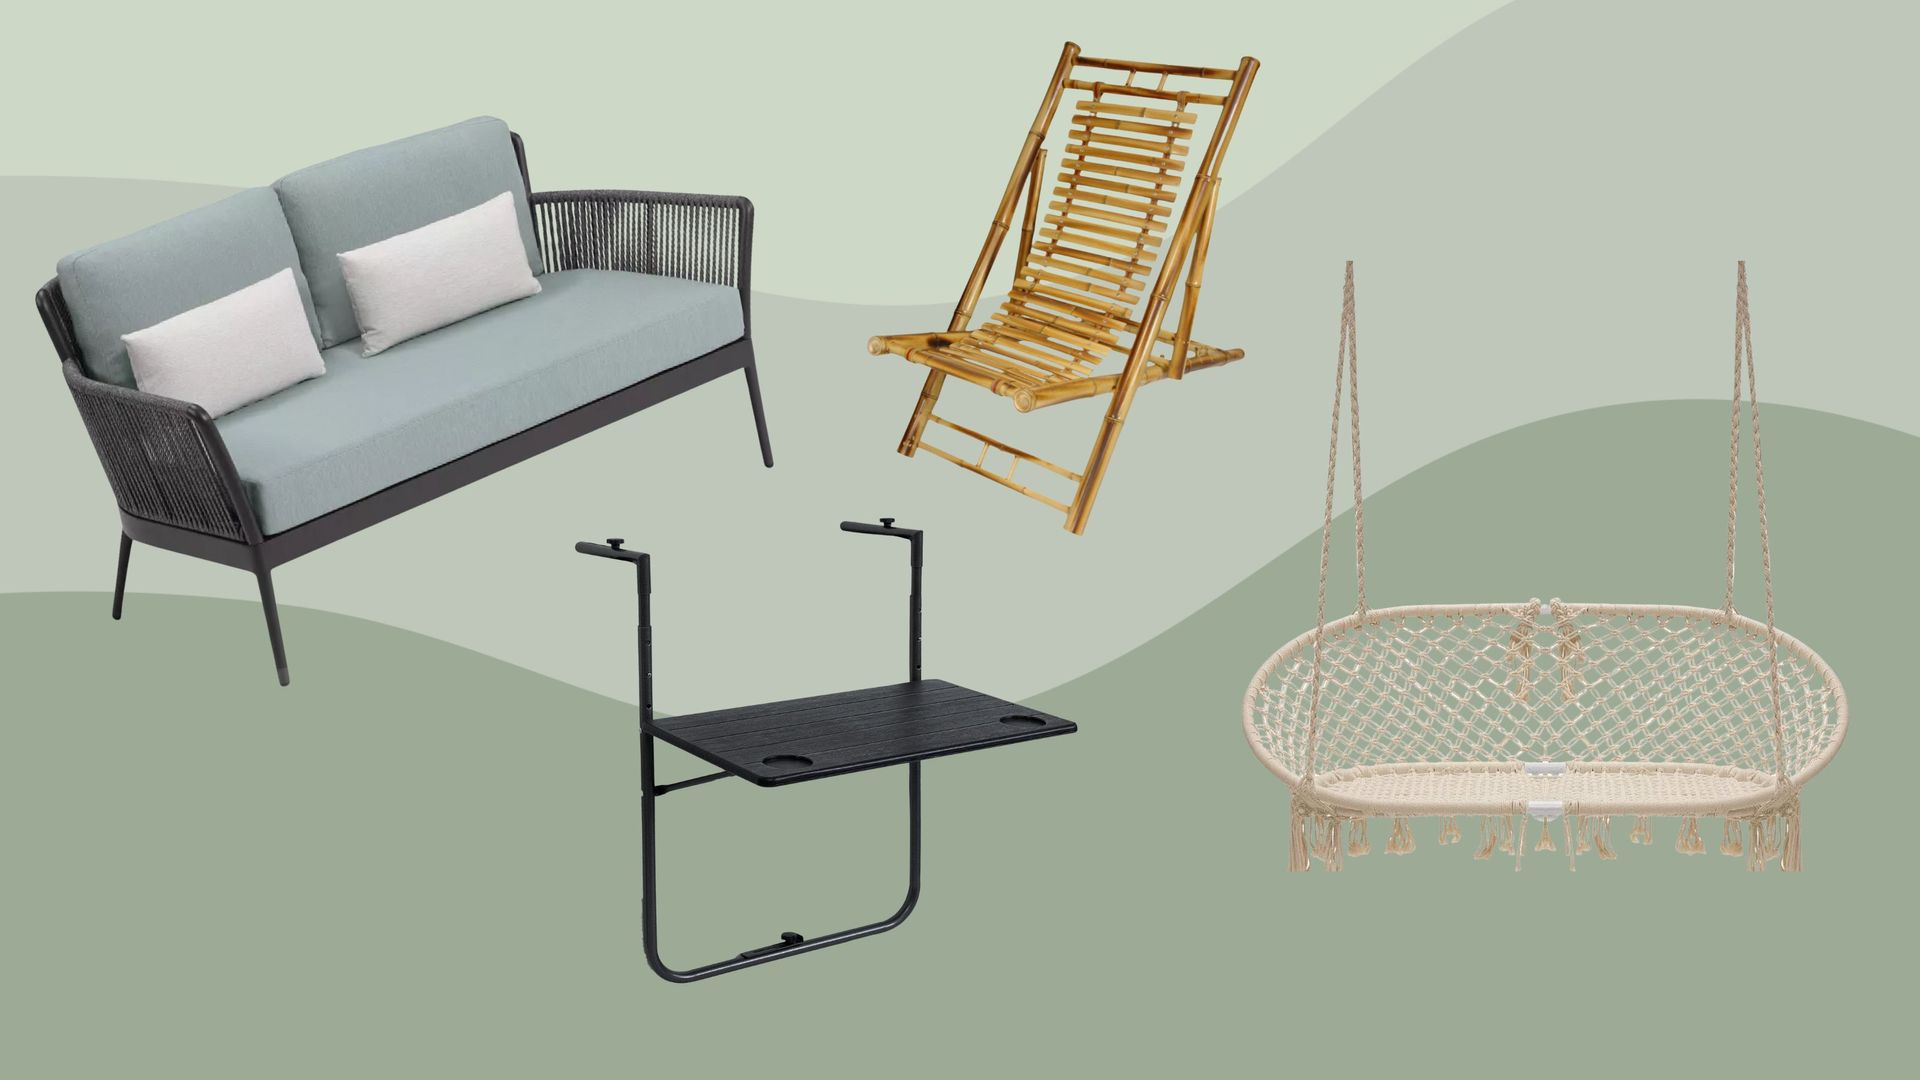 Best balcony furniture buys for small spaces | Real Homes